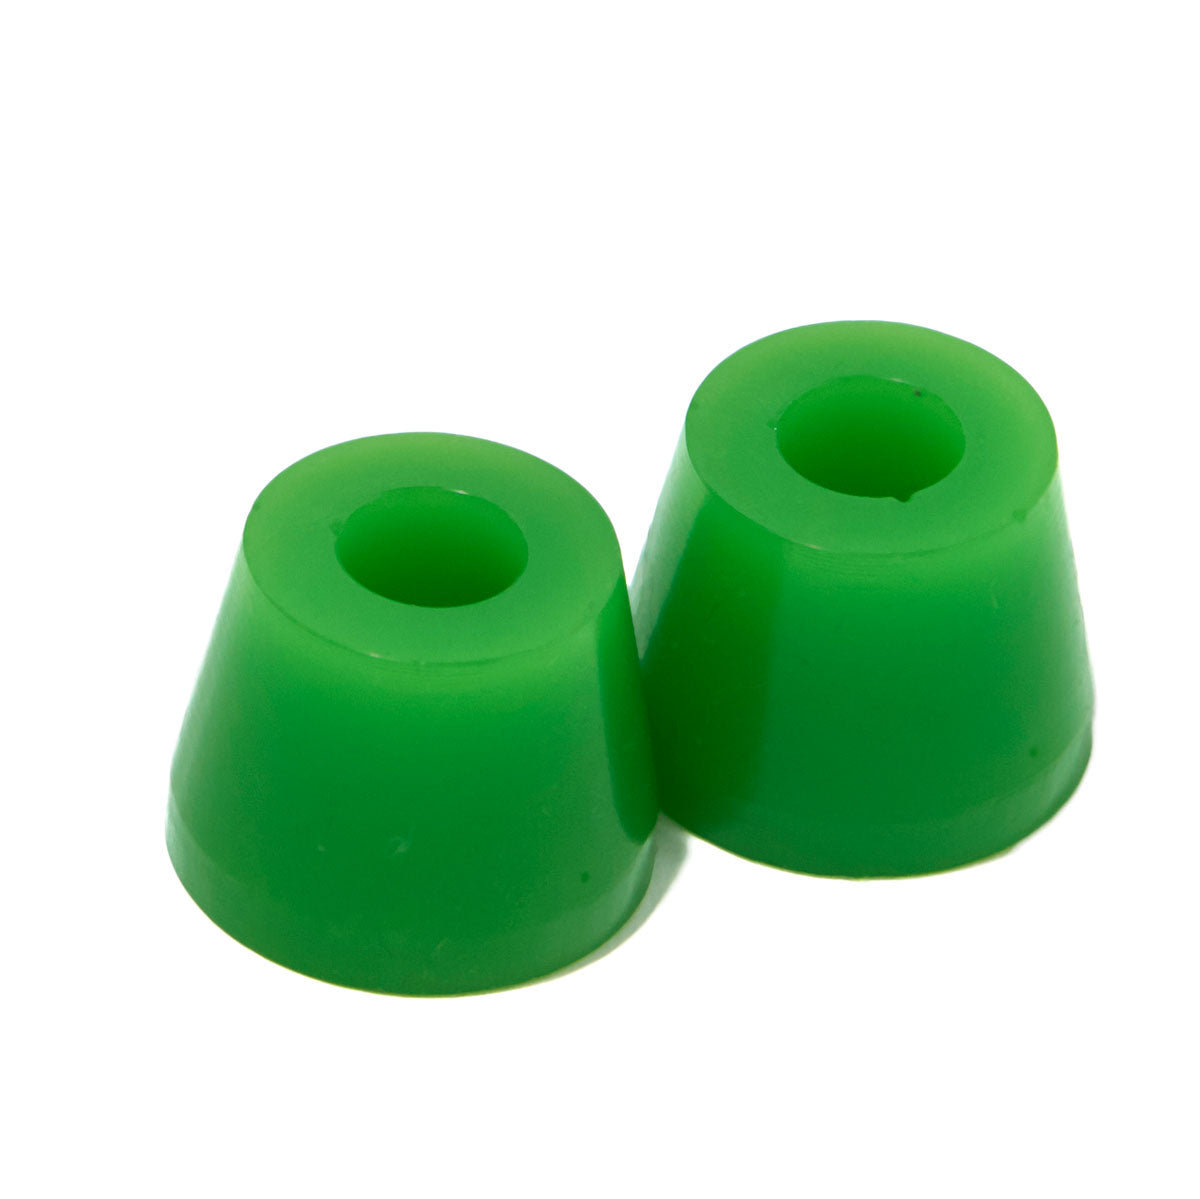 RipTide Tall Cone Bushings - APS 75a image 1